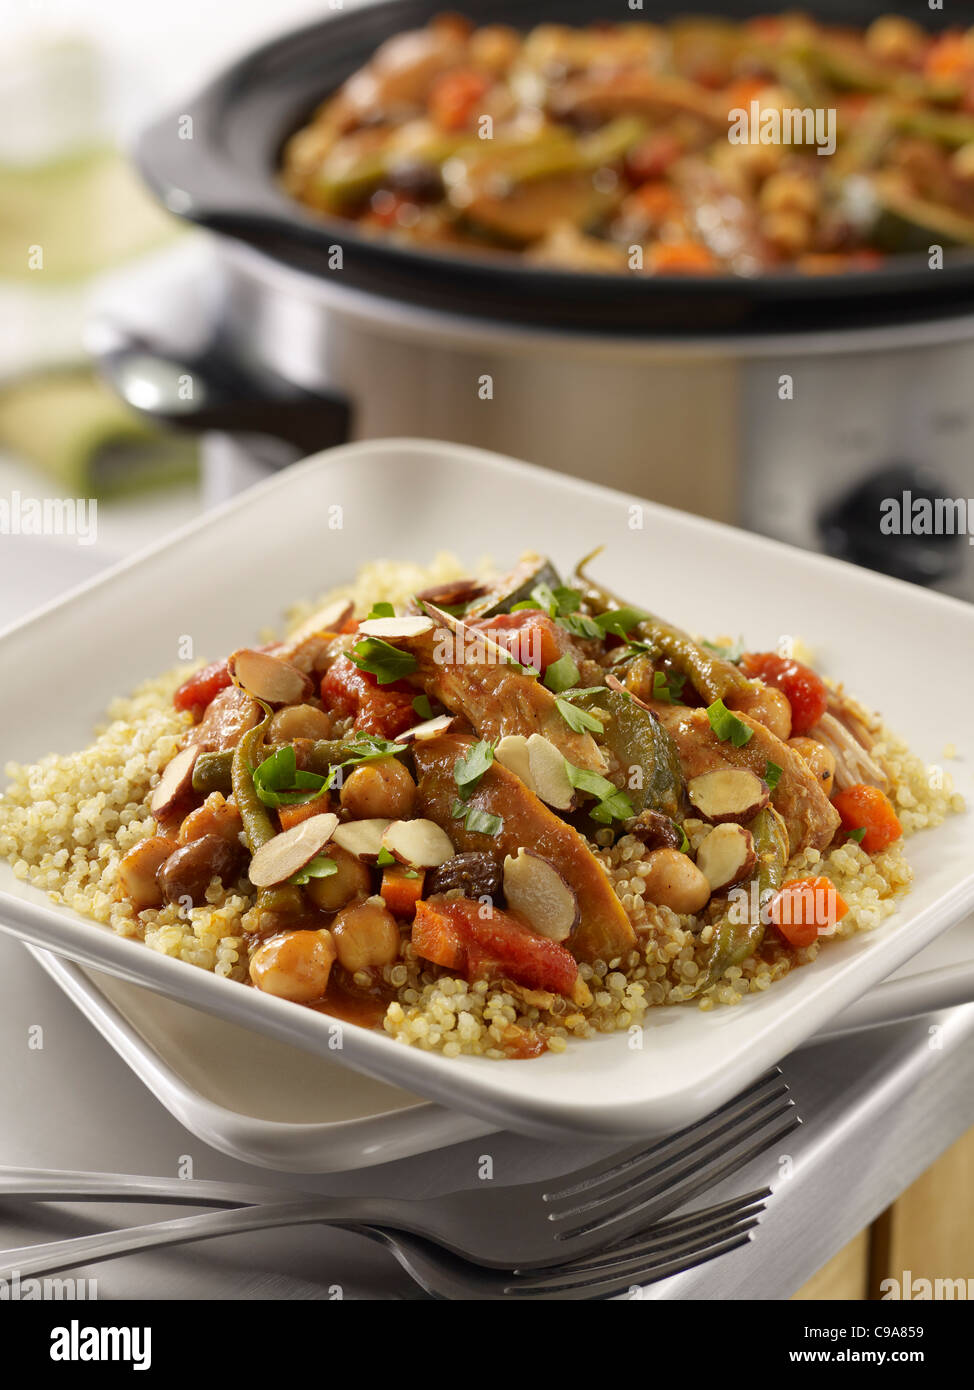 Moroccan chicken stew served over grains in a kitchen setting with a crock pot in the background Stock Photo